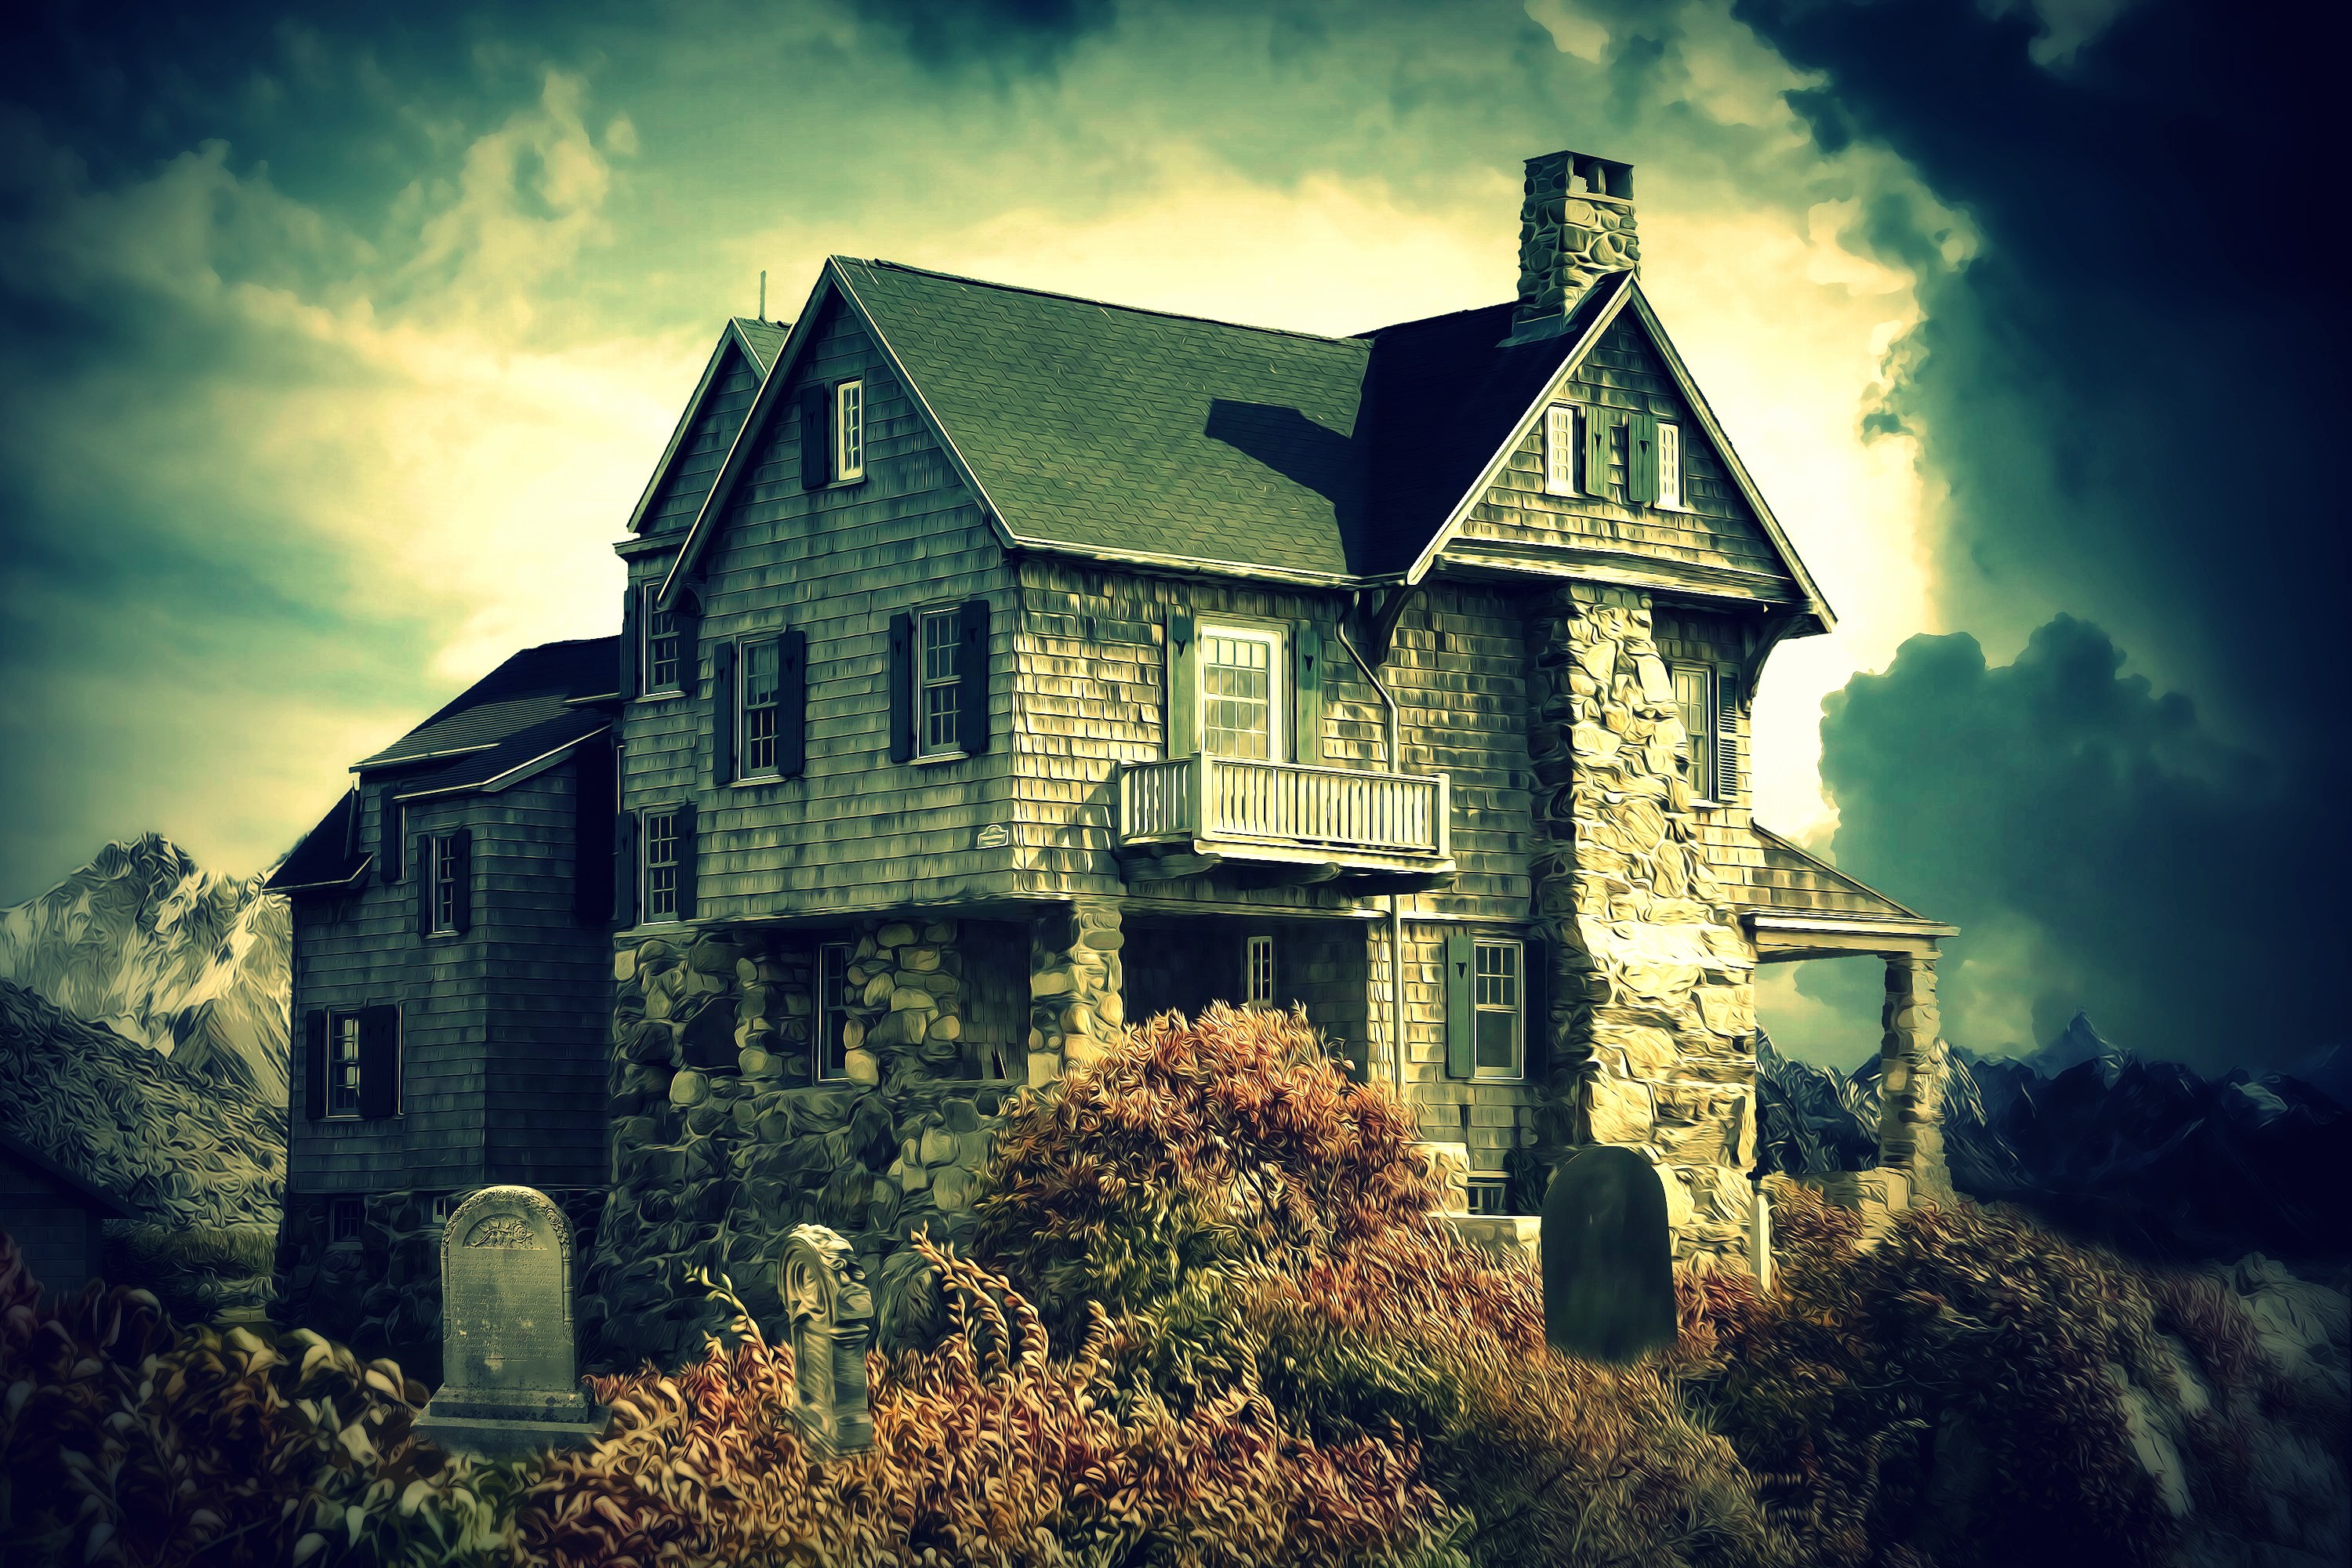 Haunted House for ios instal